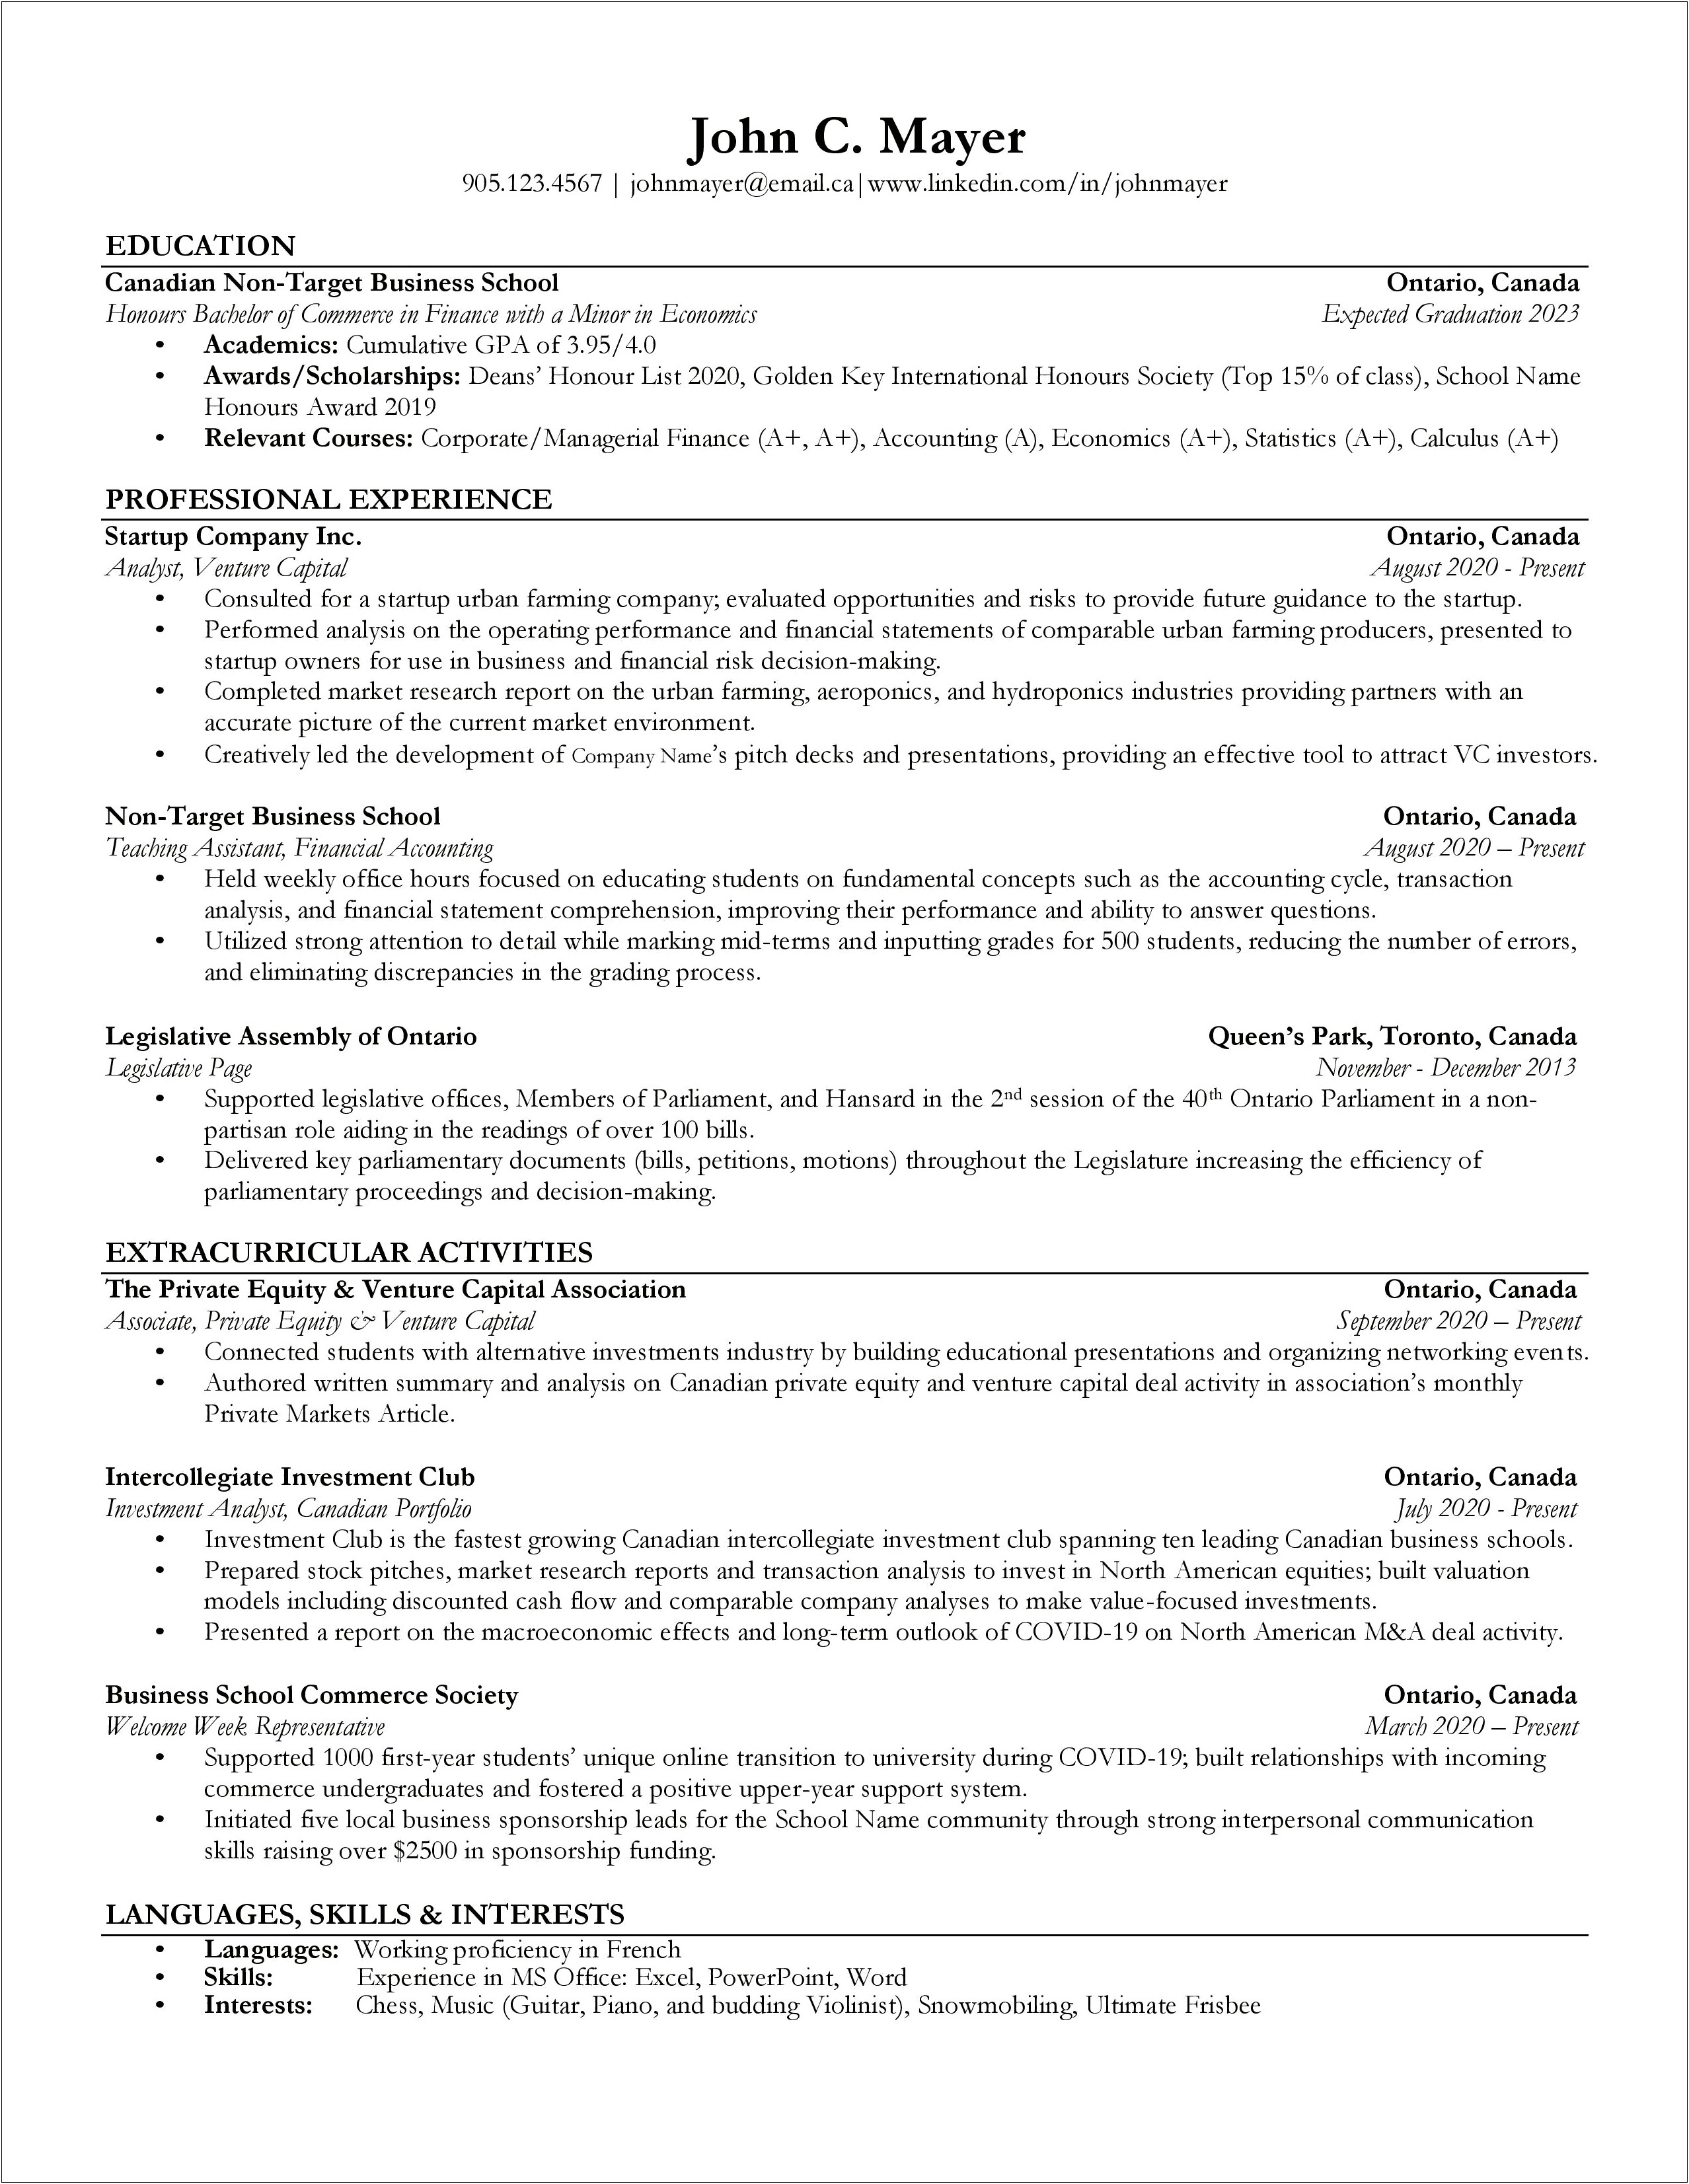 Personal Email And School Email On Resume